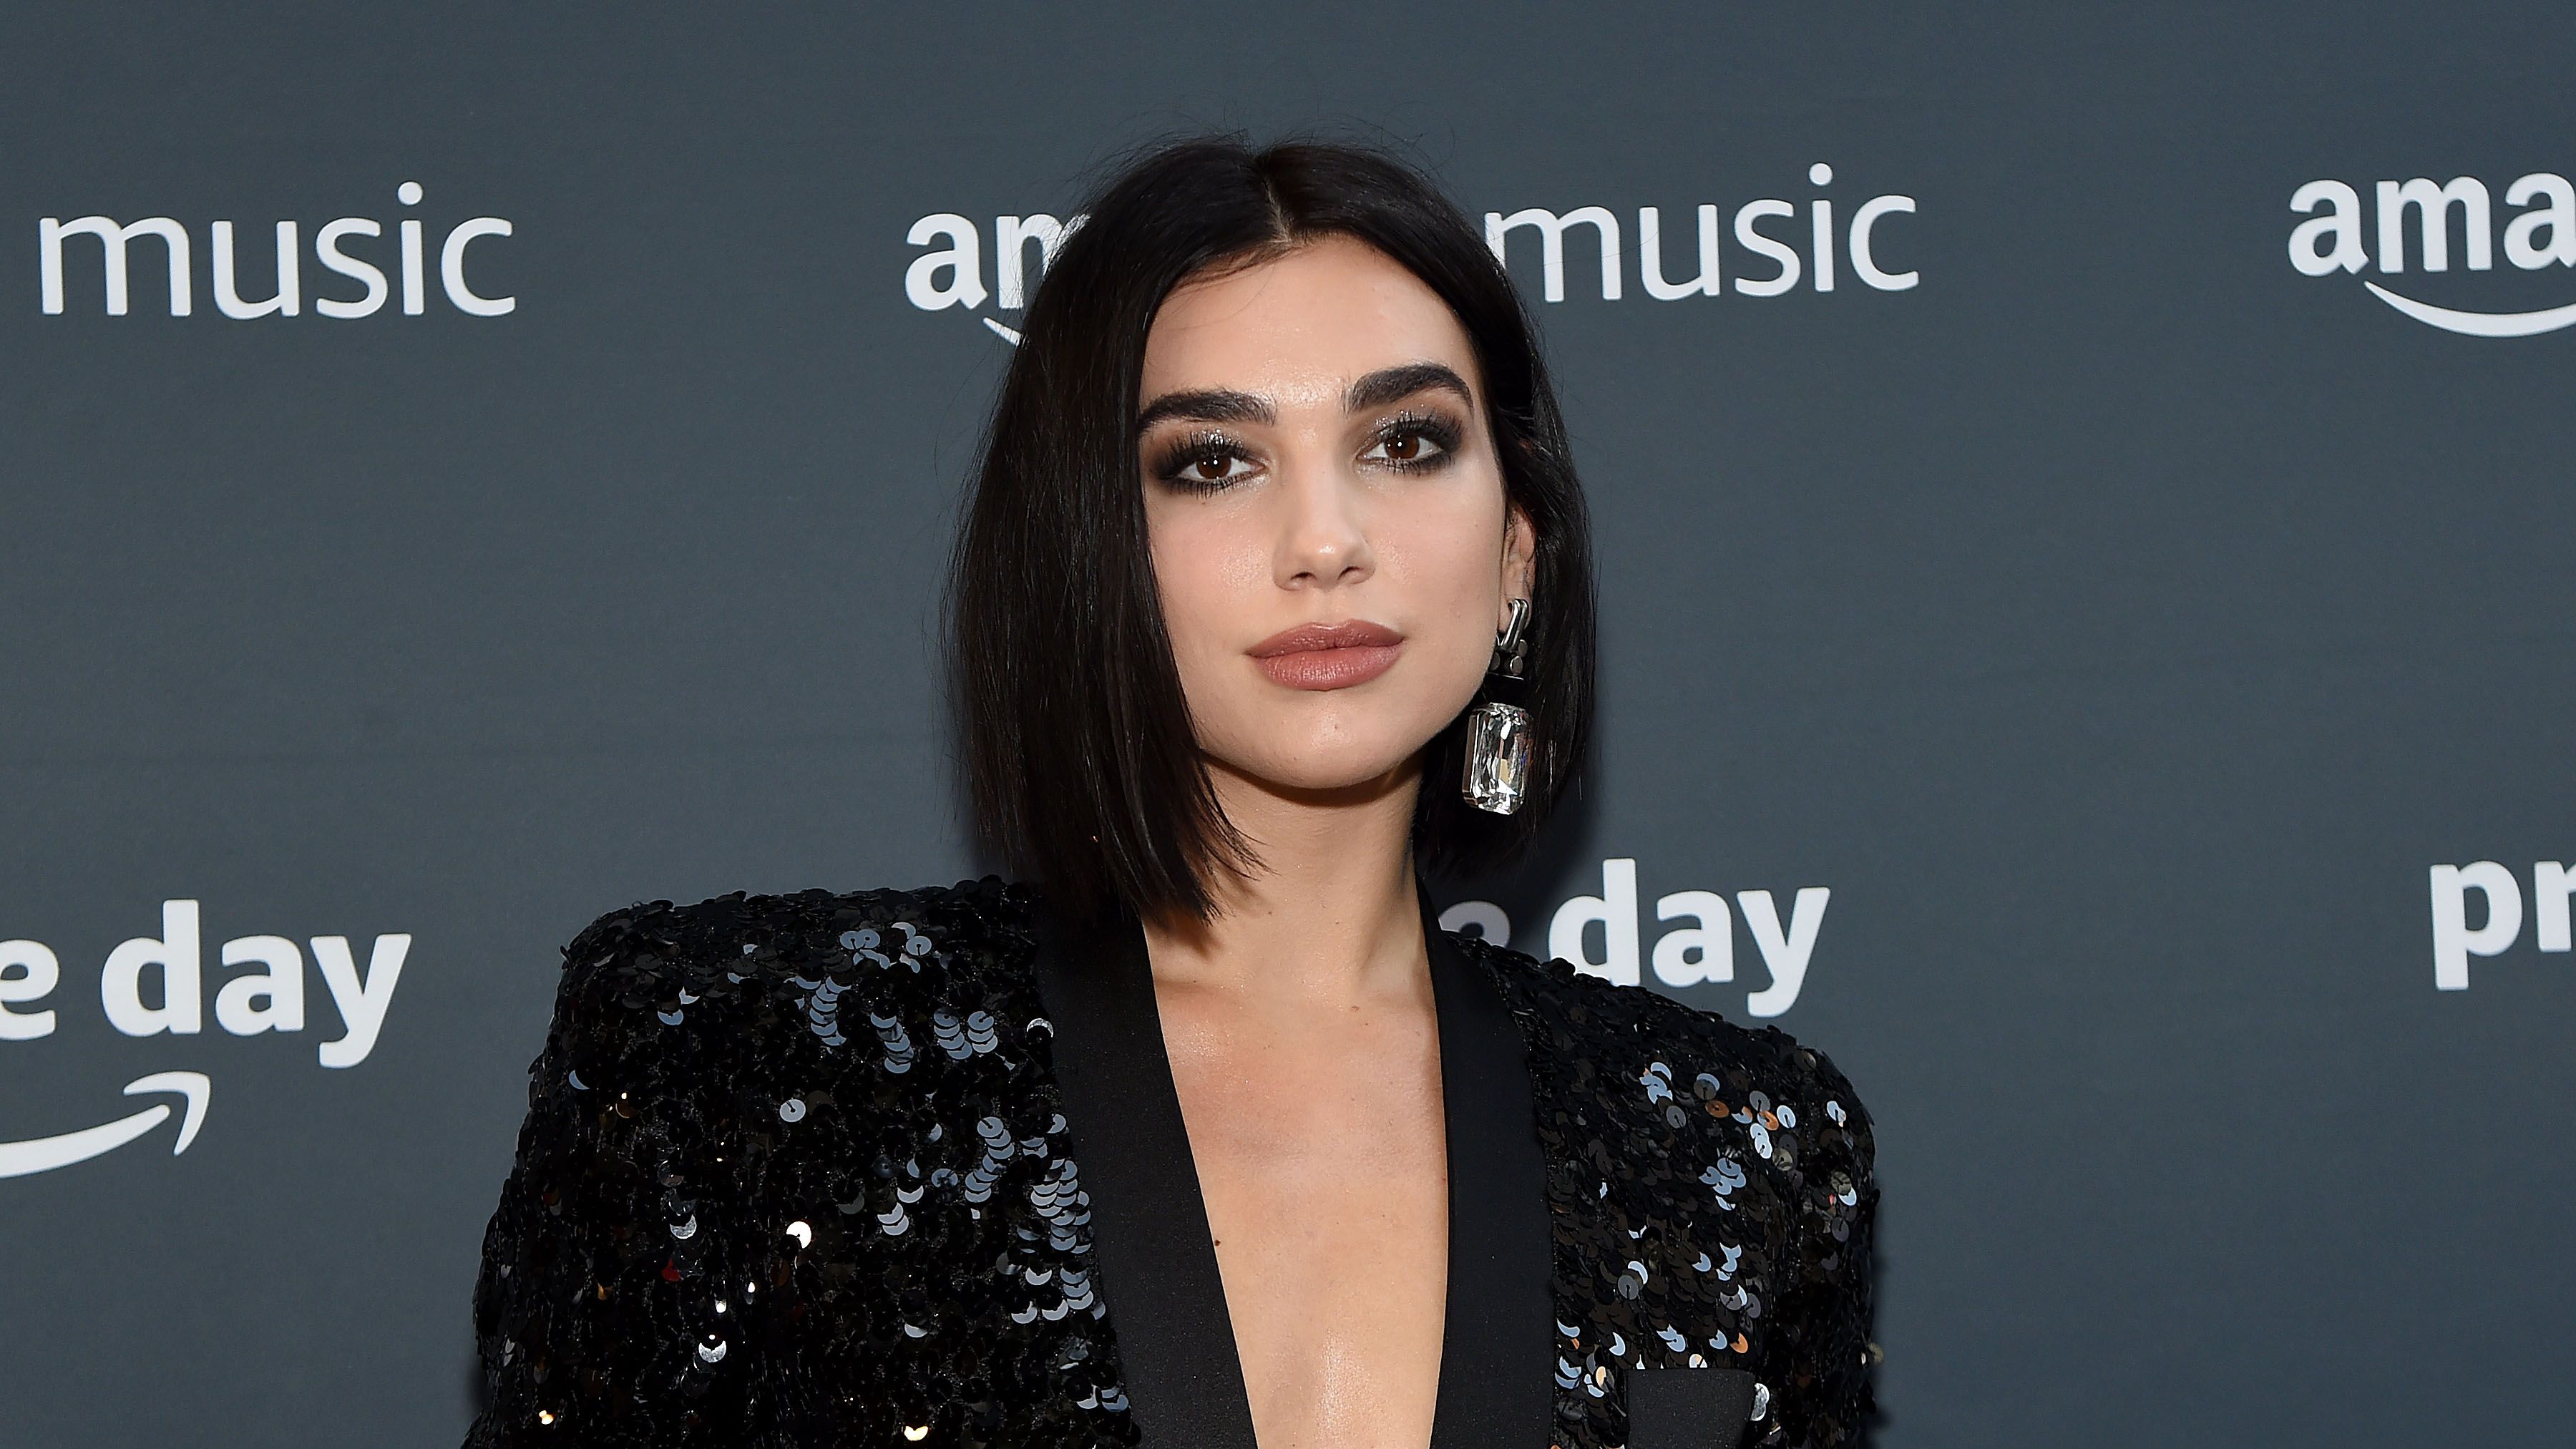 Dua Lipa's Epic Abs Are Sculpted In A Gucci bra Top In IG Pics